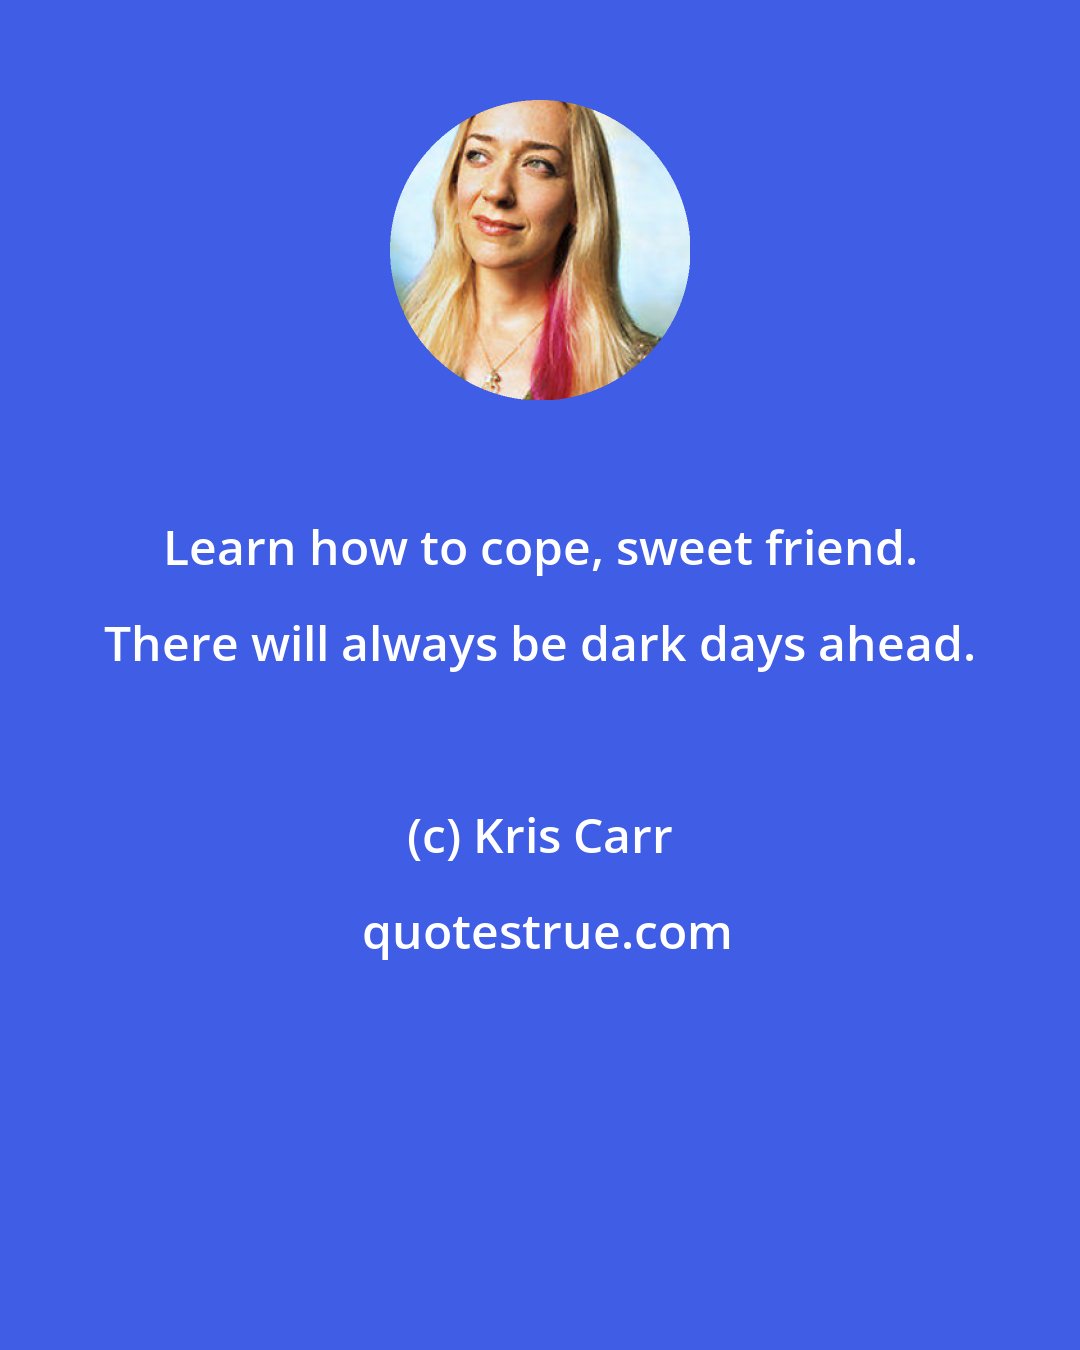 Kris Carr: Learn how to cope, sweet friend. There will always be dark days ahead.